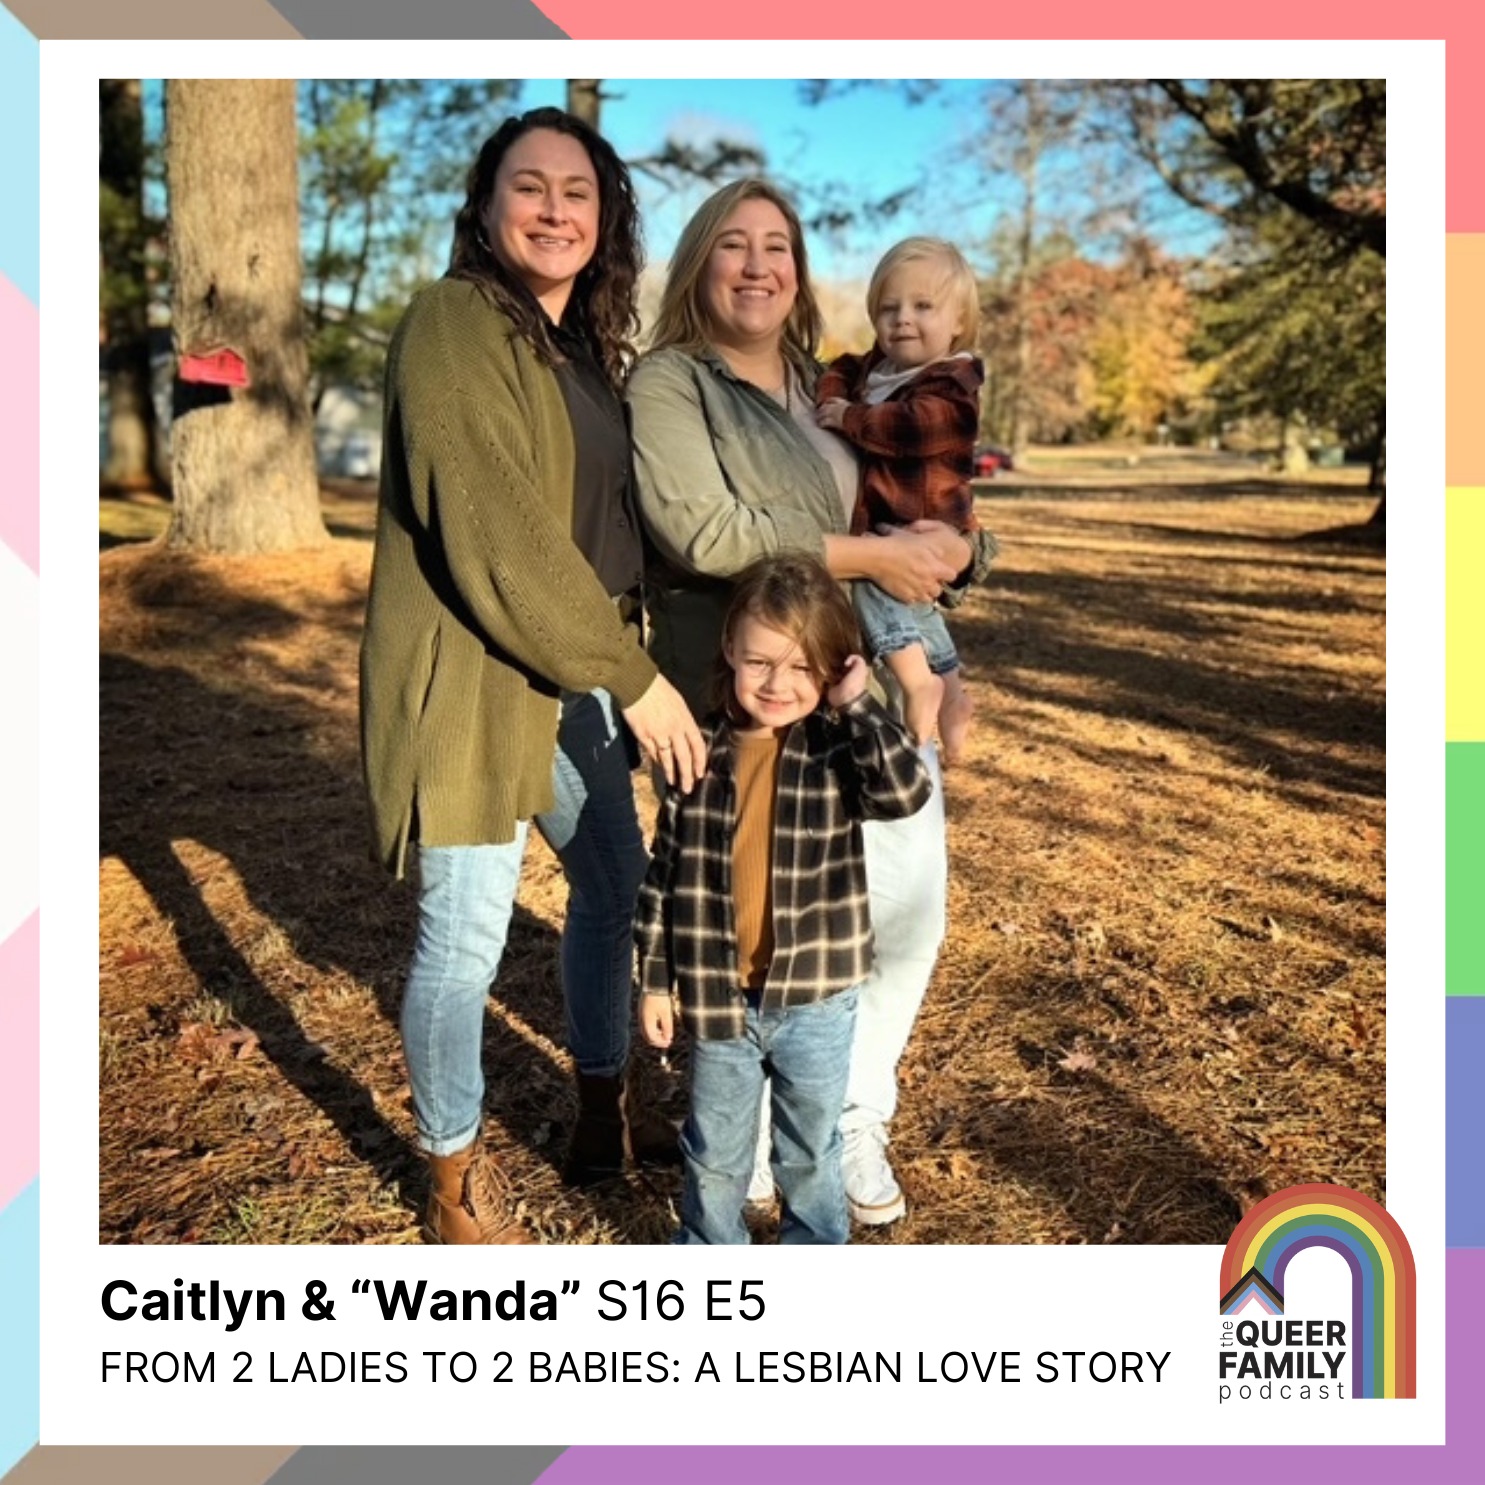 From 2 Ladies To 2 Babies: A Lesbian Love Story